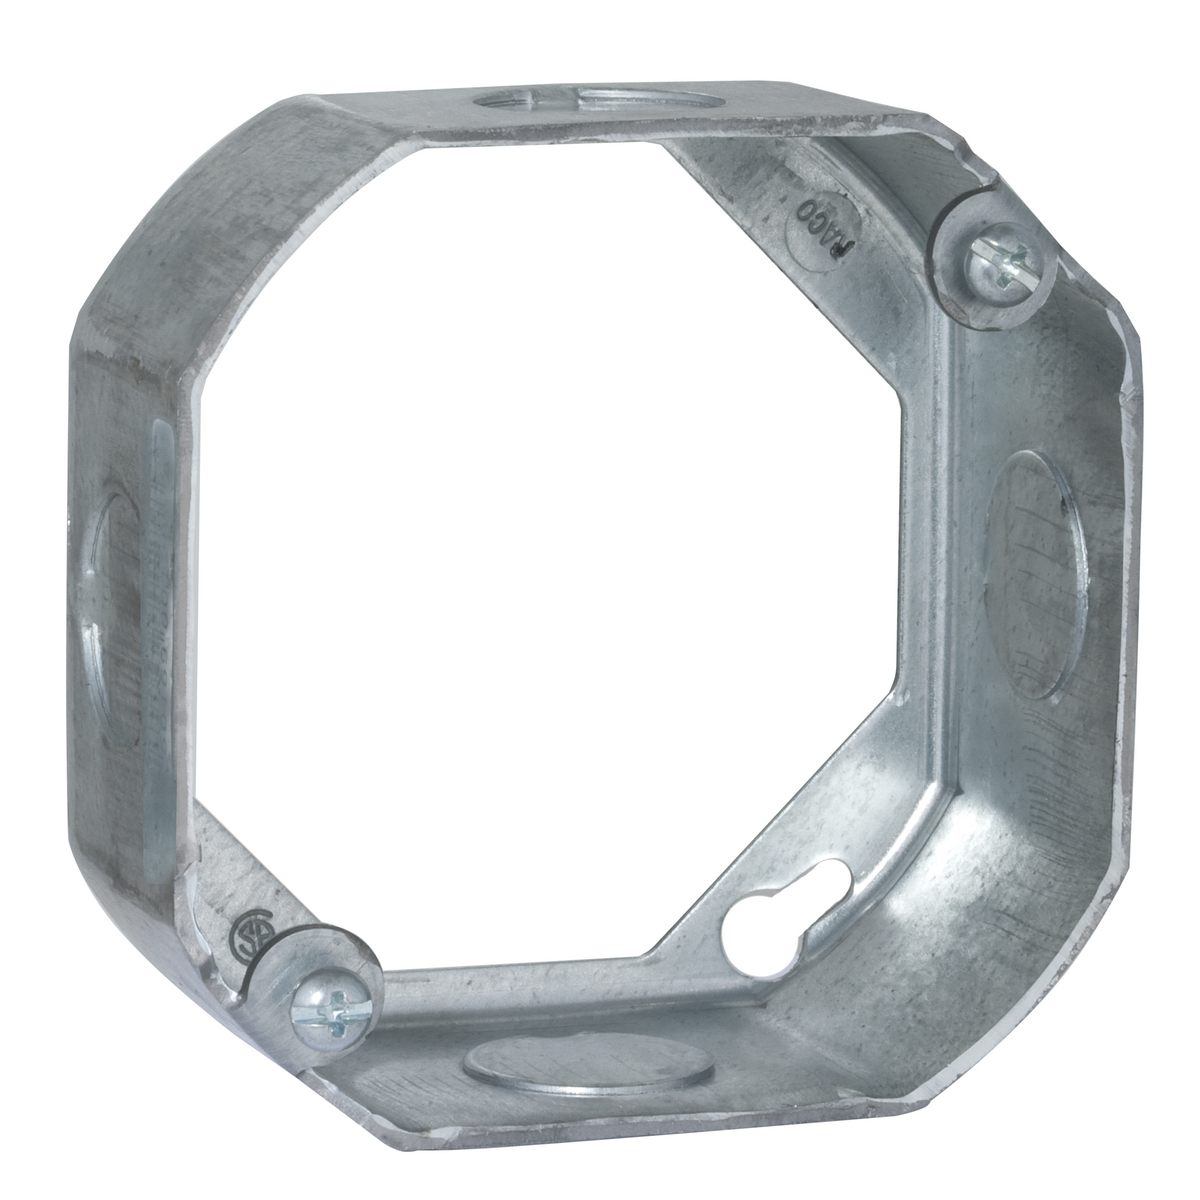 RACO 128 4" OCTAGON EXTENSION, 1-1/2" DEEP, 1/2" SIDE KNOCKOUTS